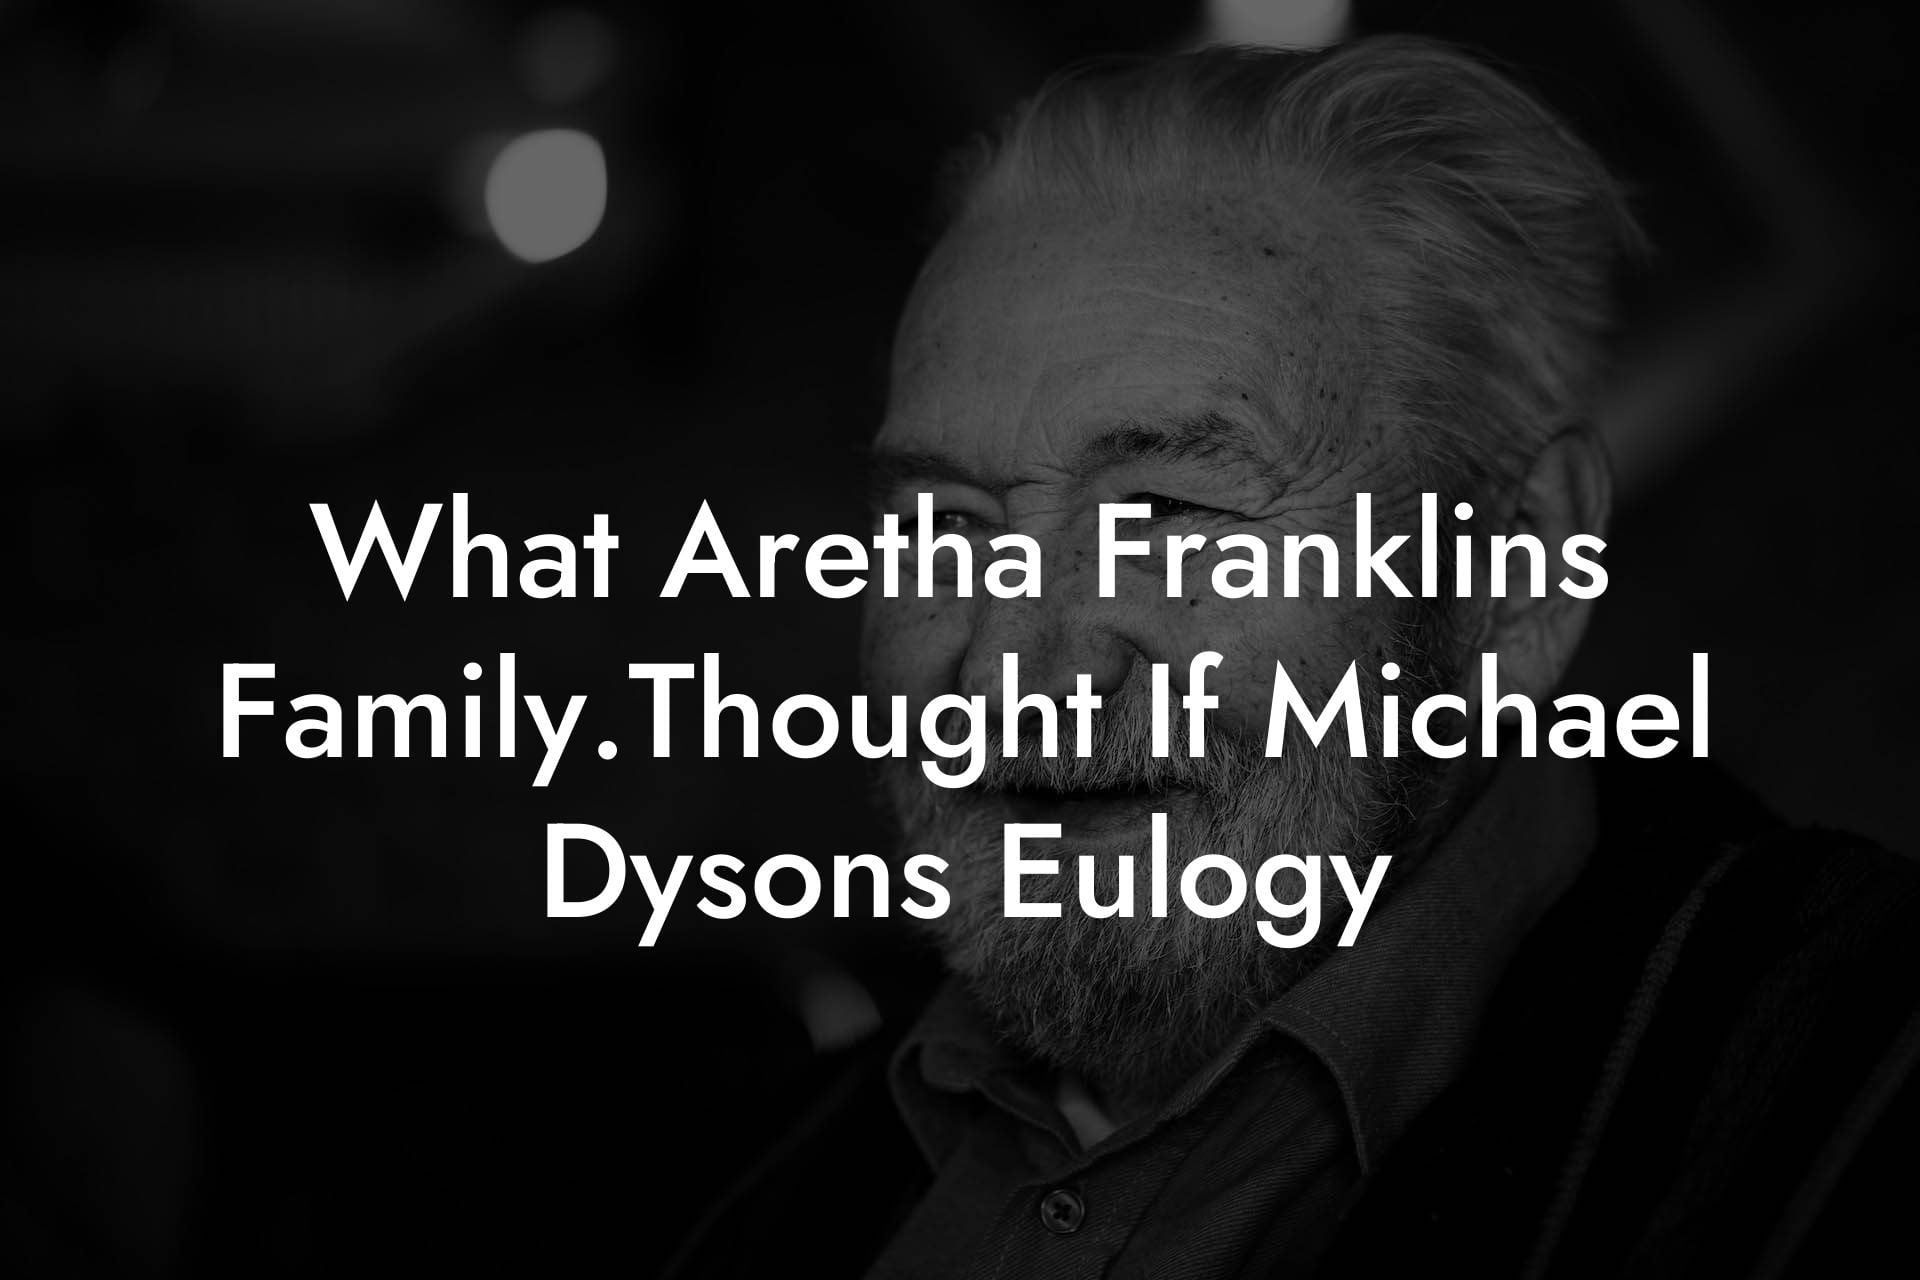 What Aretha Franklins Family.Thought If Michael Dysons Eulogy